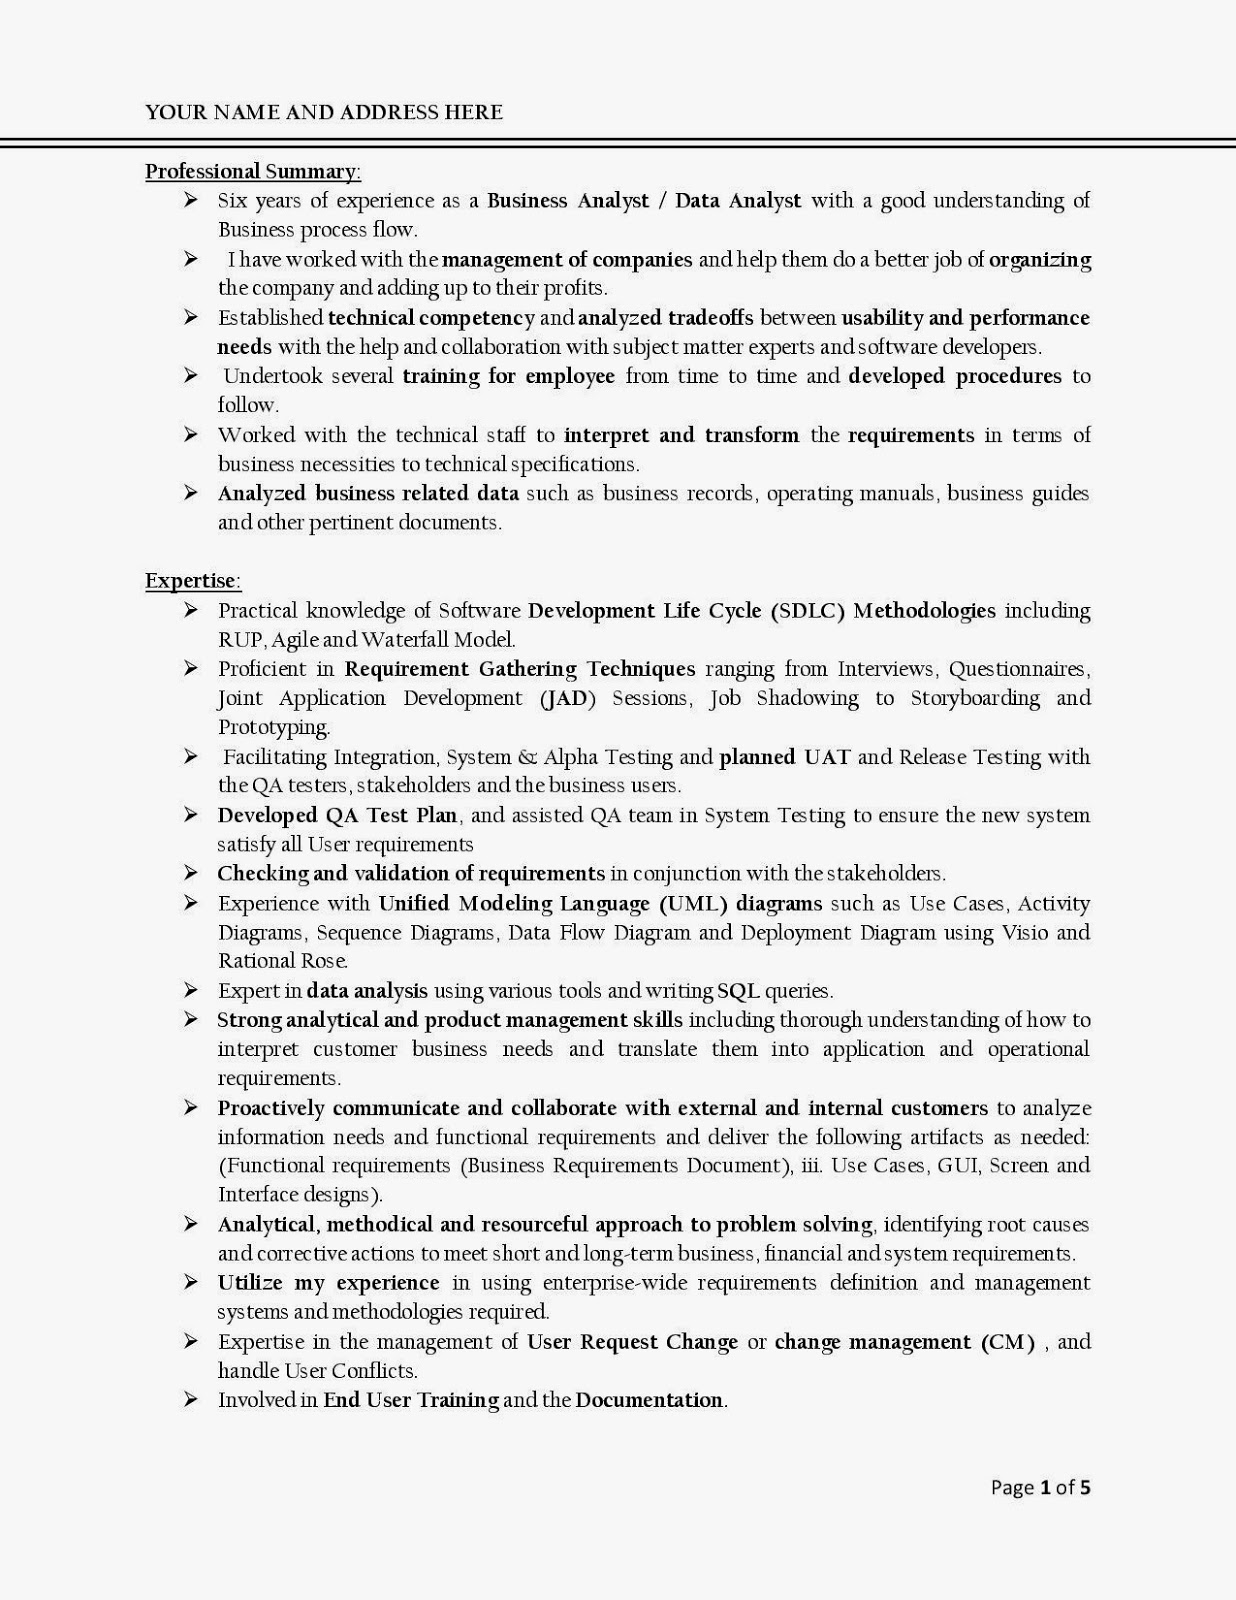 Functional resume example business analyst